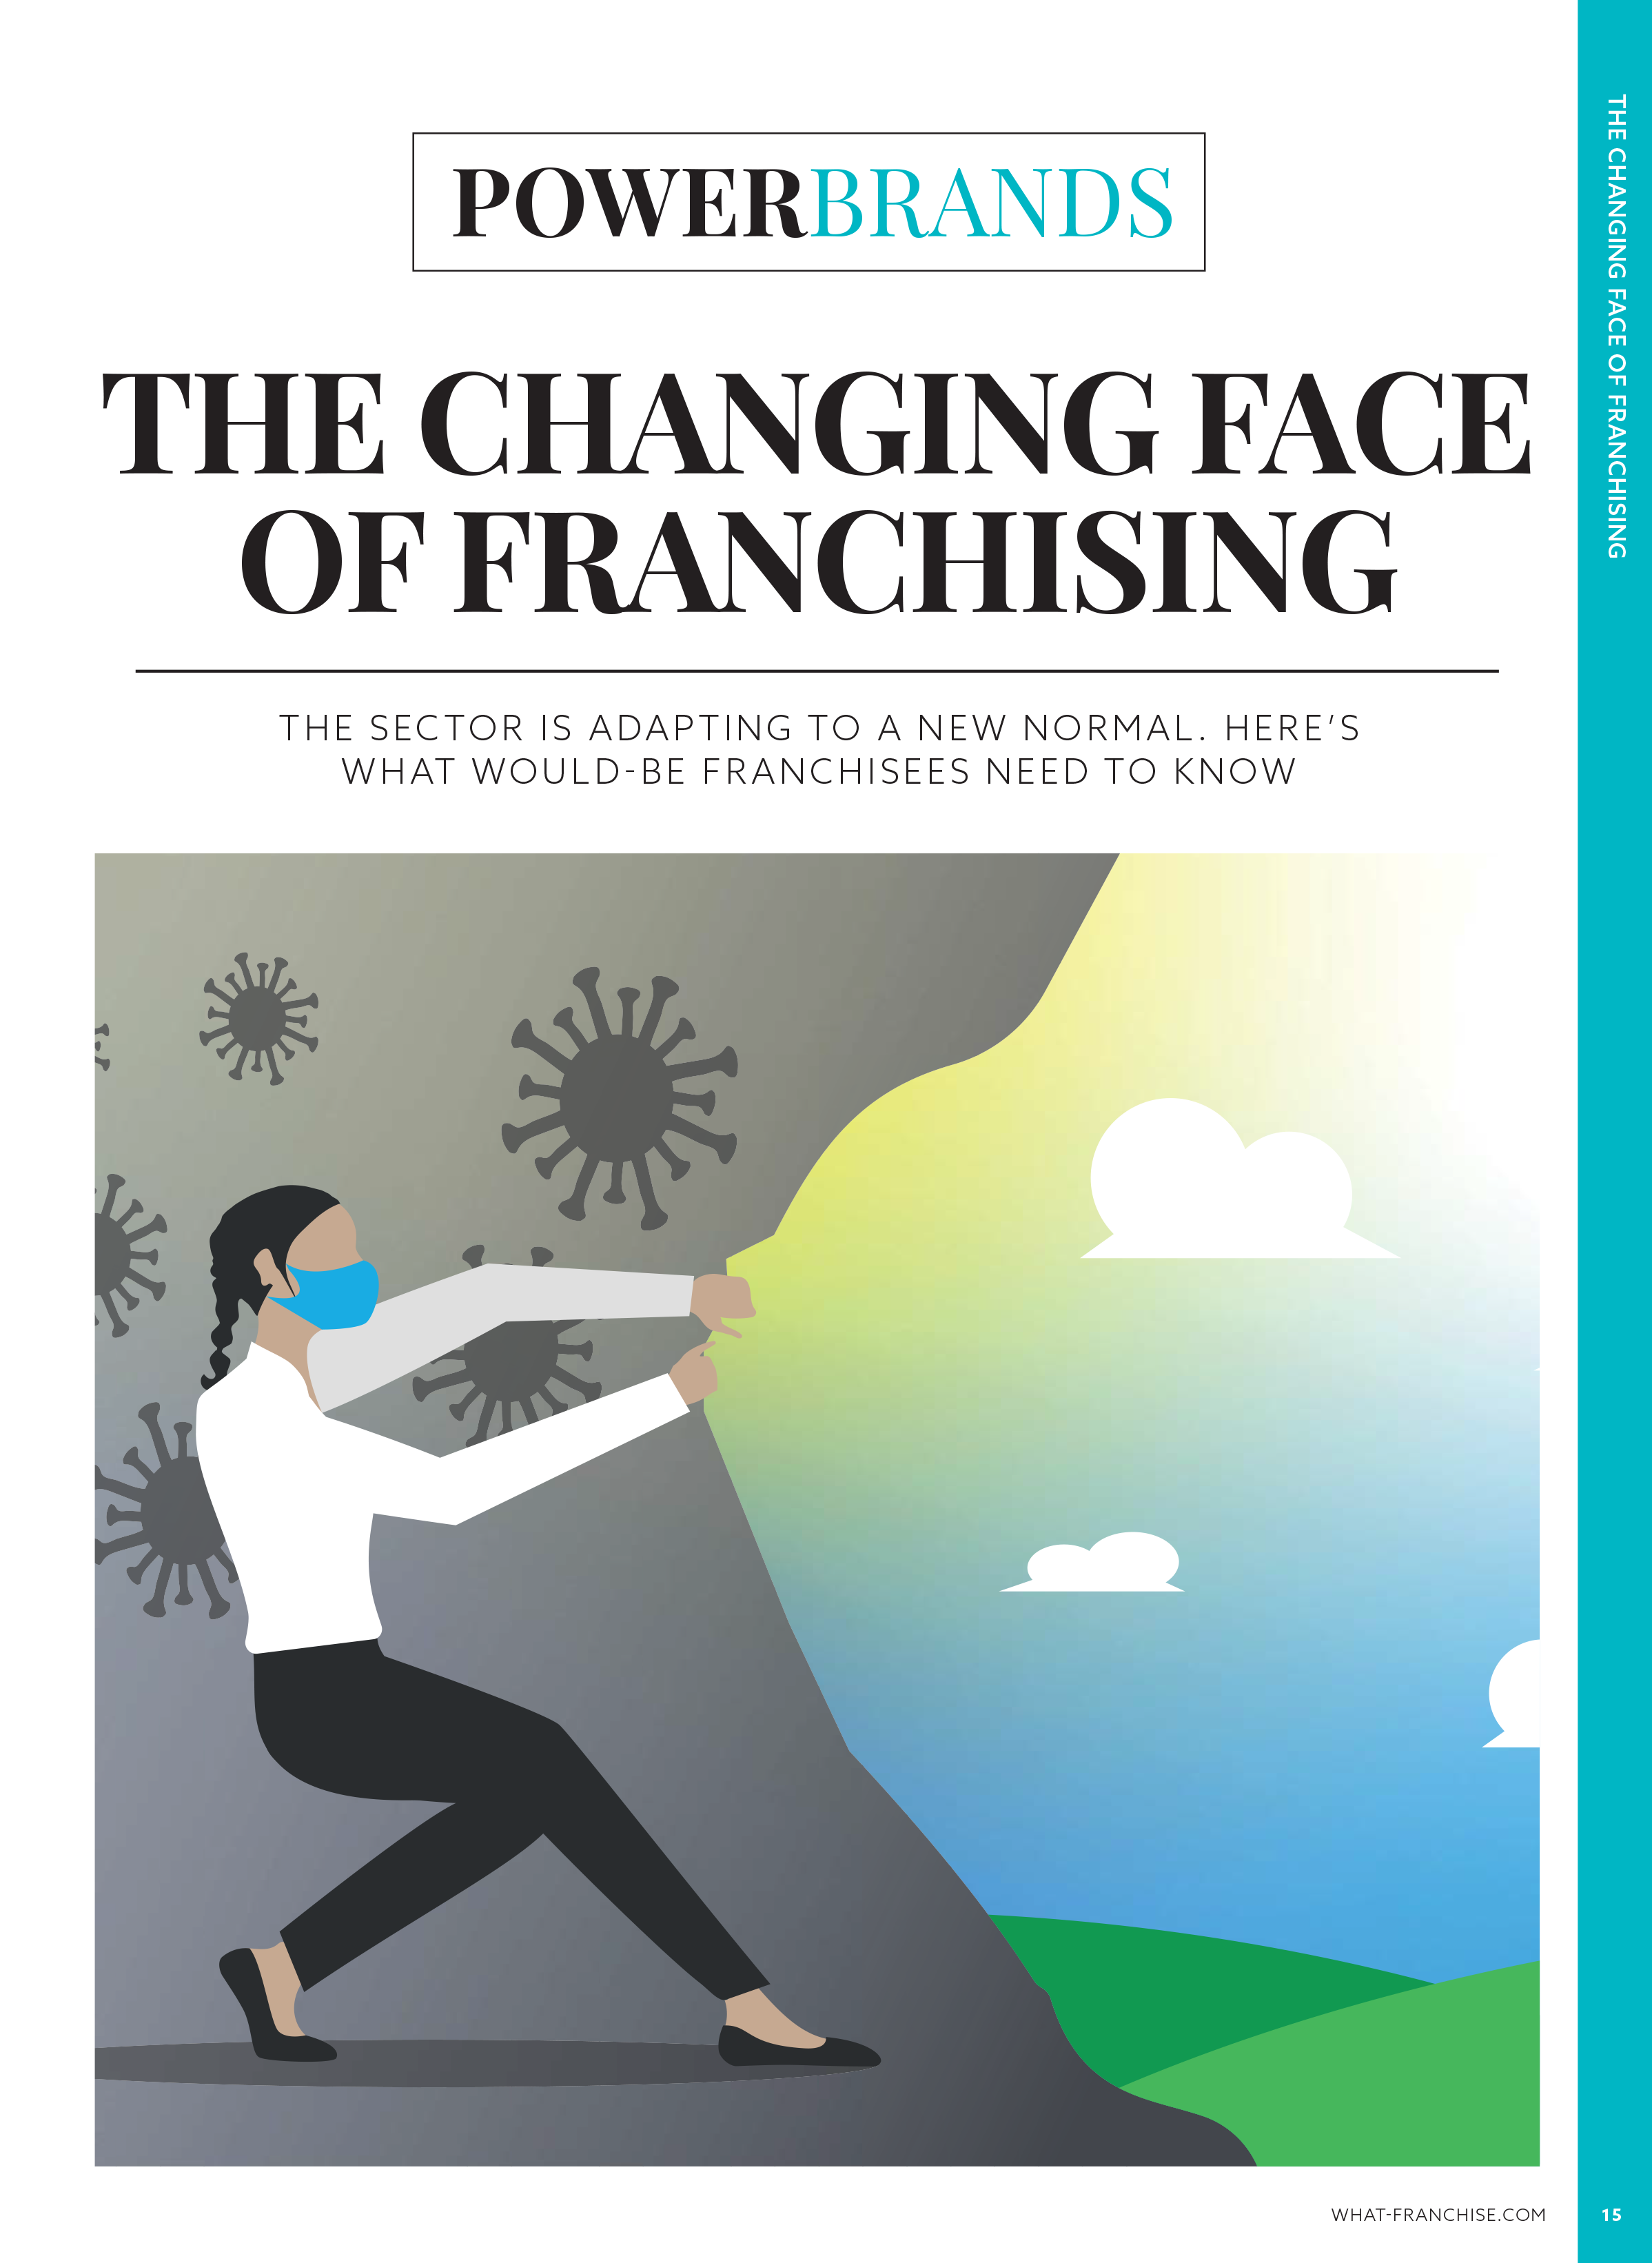 Powerbrands: The Changing Face of Franchising